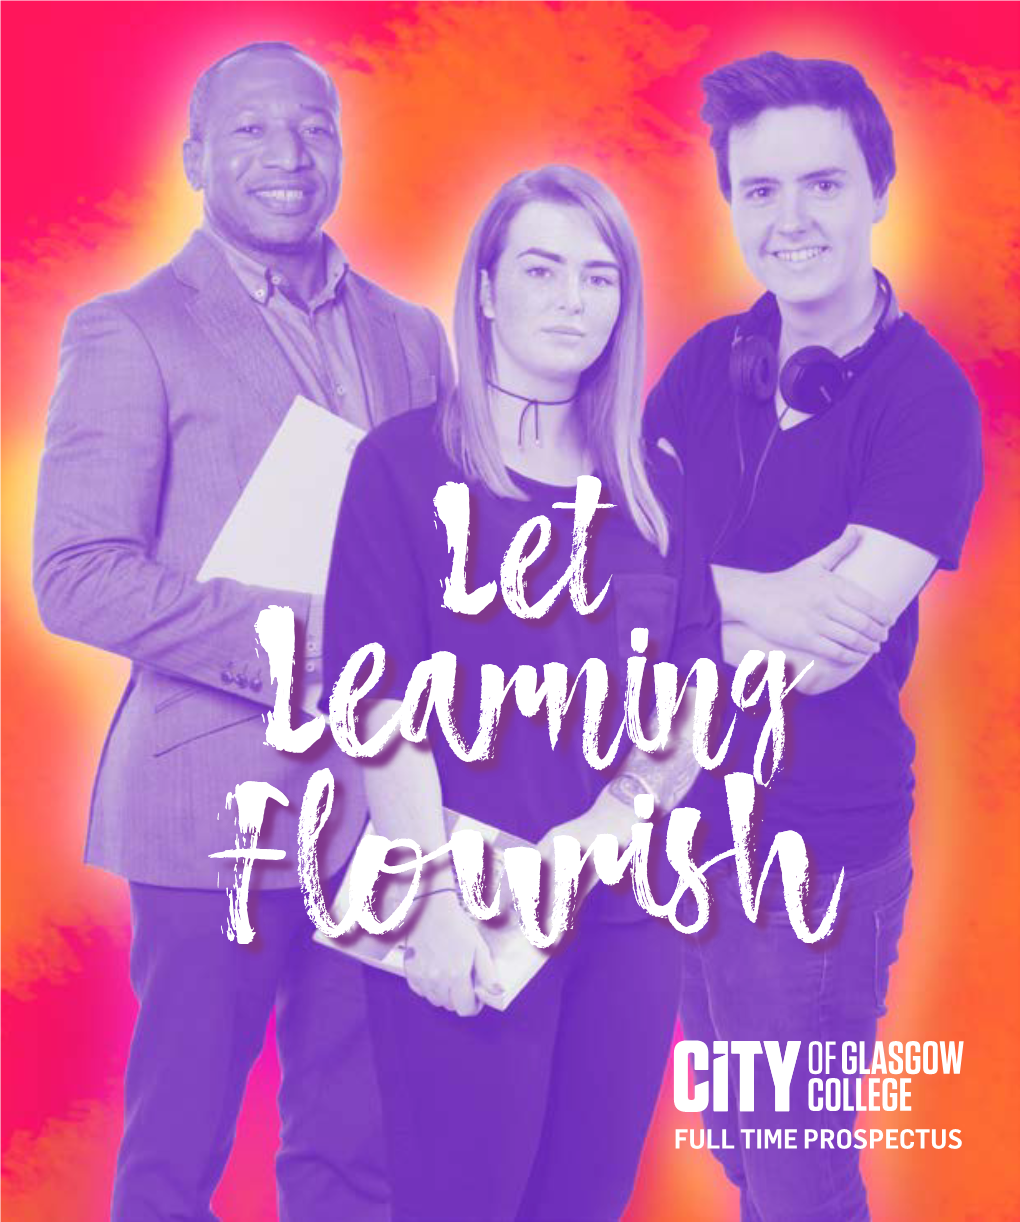 FULL TIME PROSPECTUS What Can City of Glasgow College Do for You? Let Learning